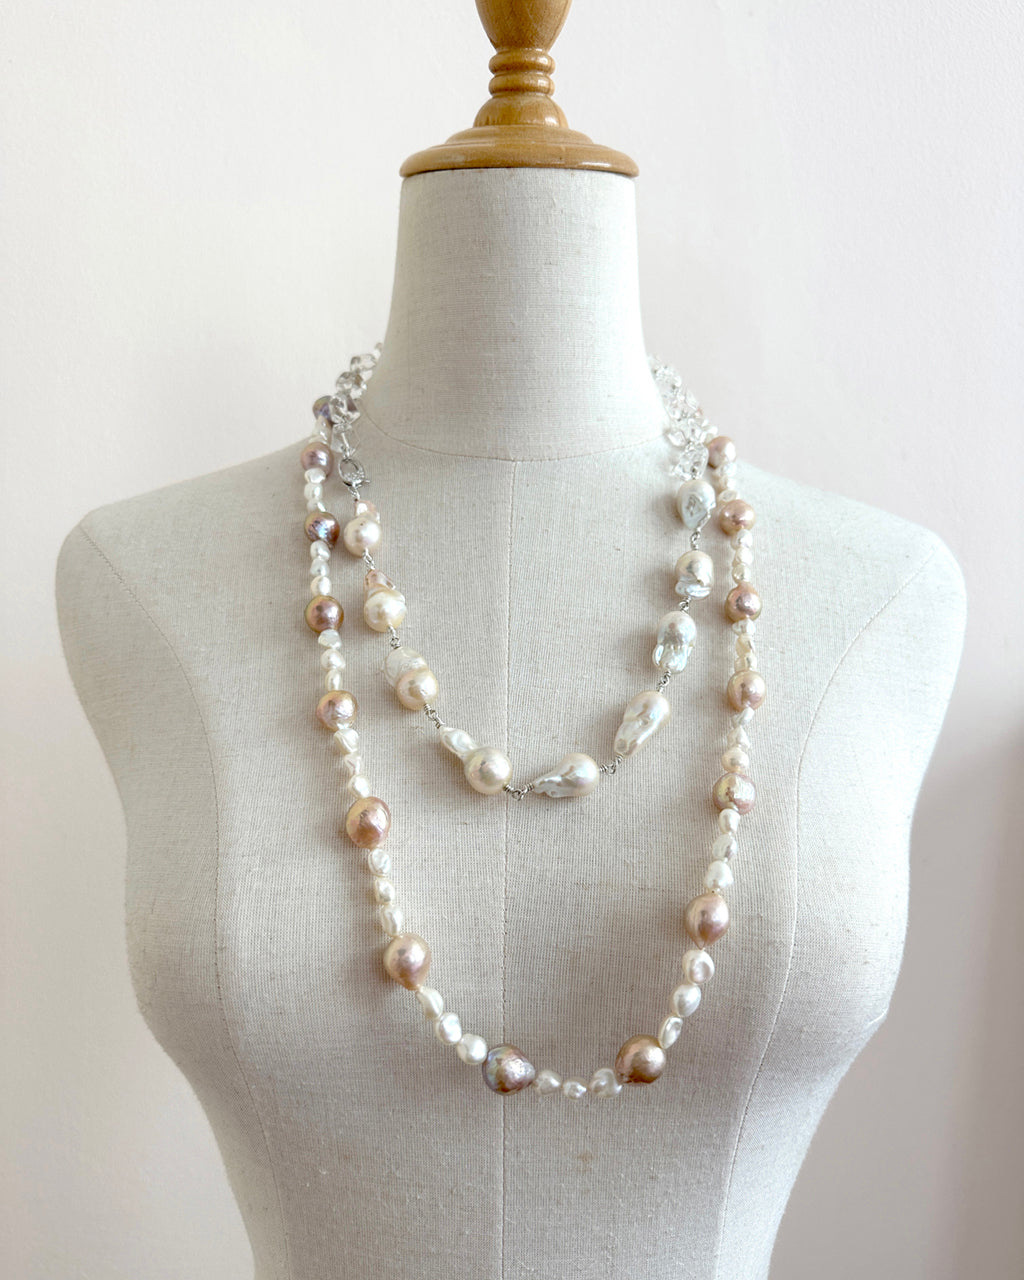 Five-strand Multi-colored Pearl Necklace | Dog House Pearls